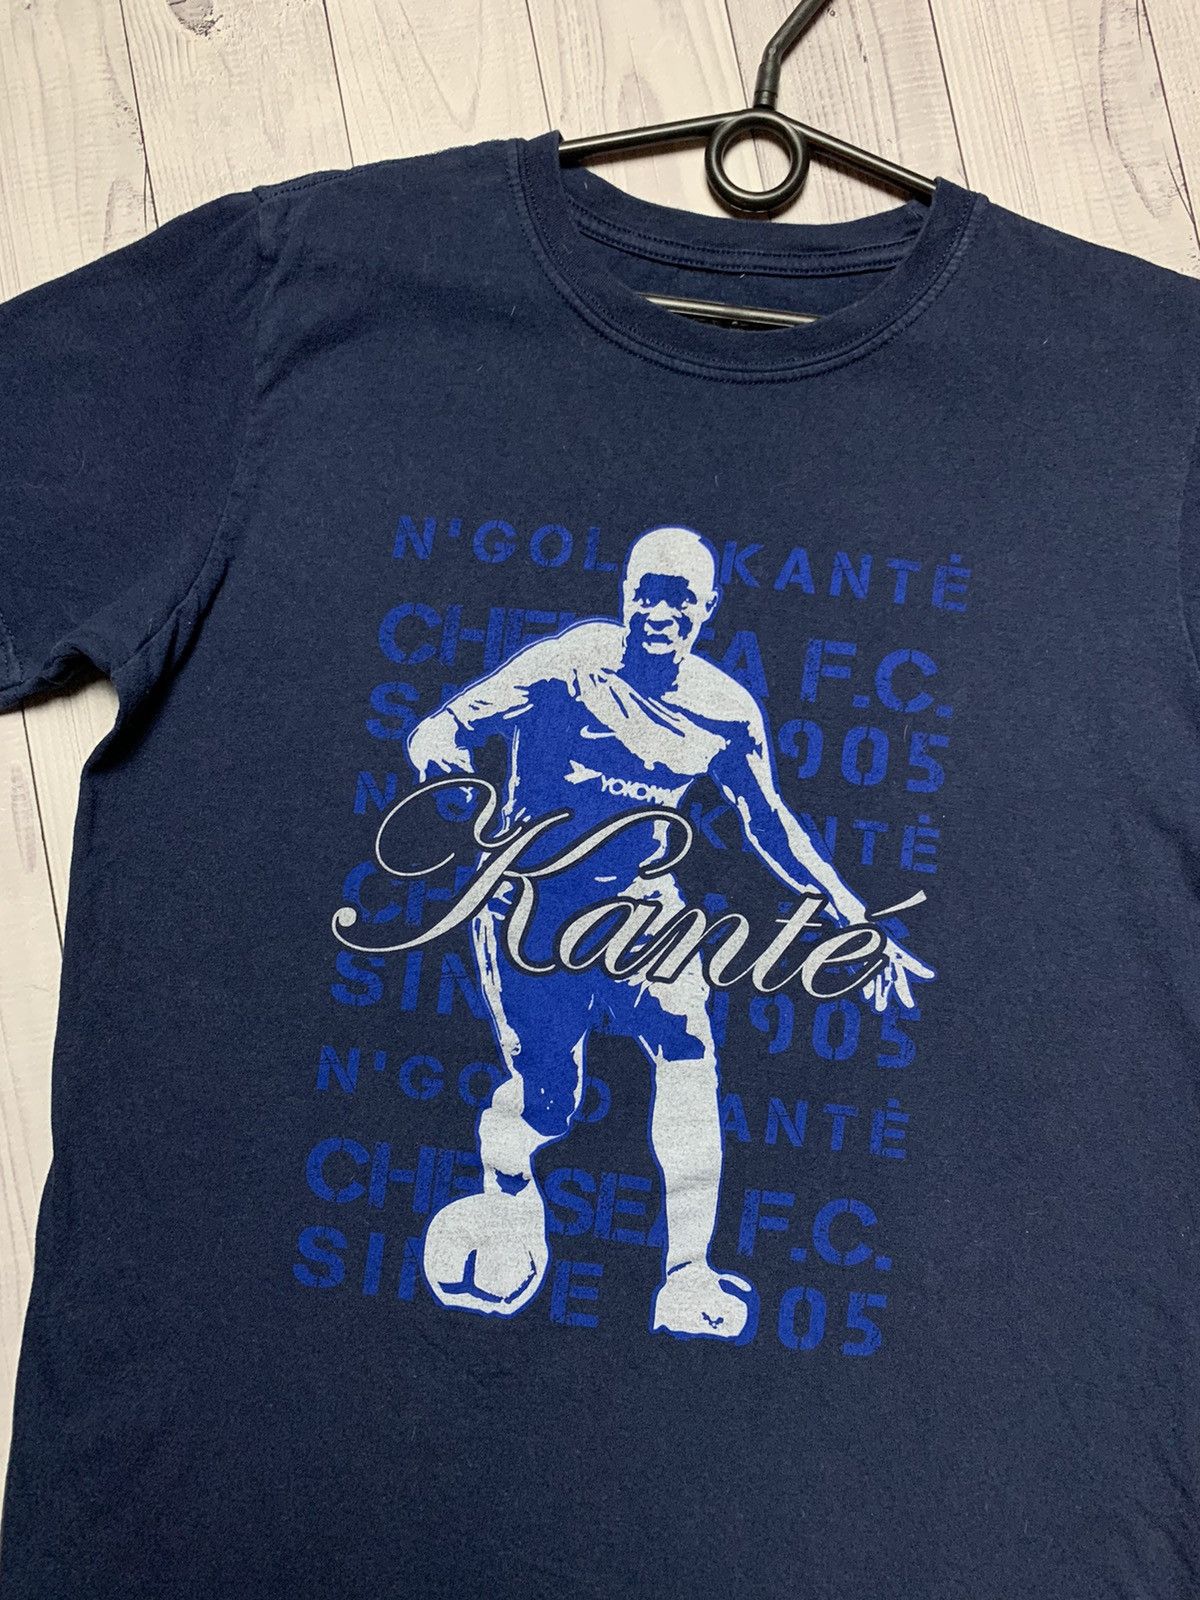 Soccer Jersey Chelsea soccer tee Kante size M Size US M / EU 48-50 / 2 - 2 Preview